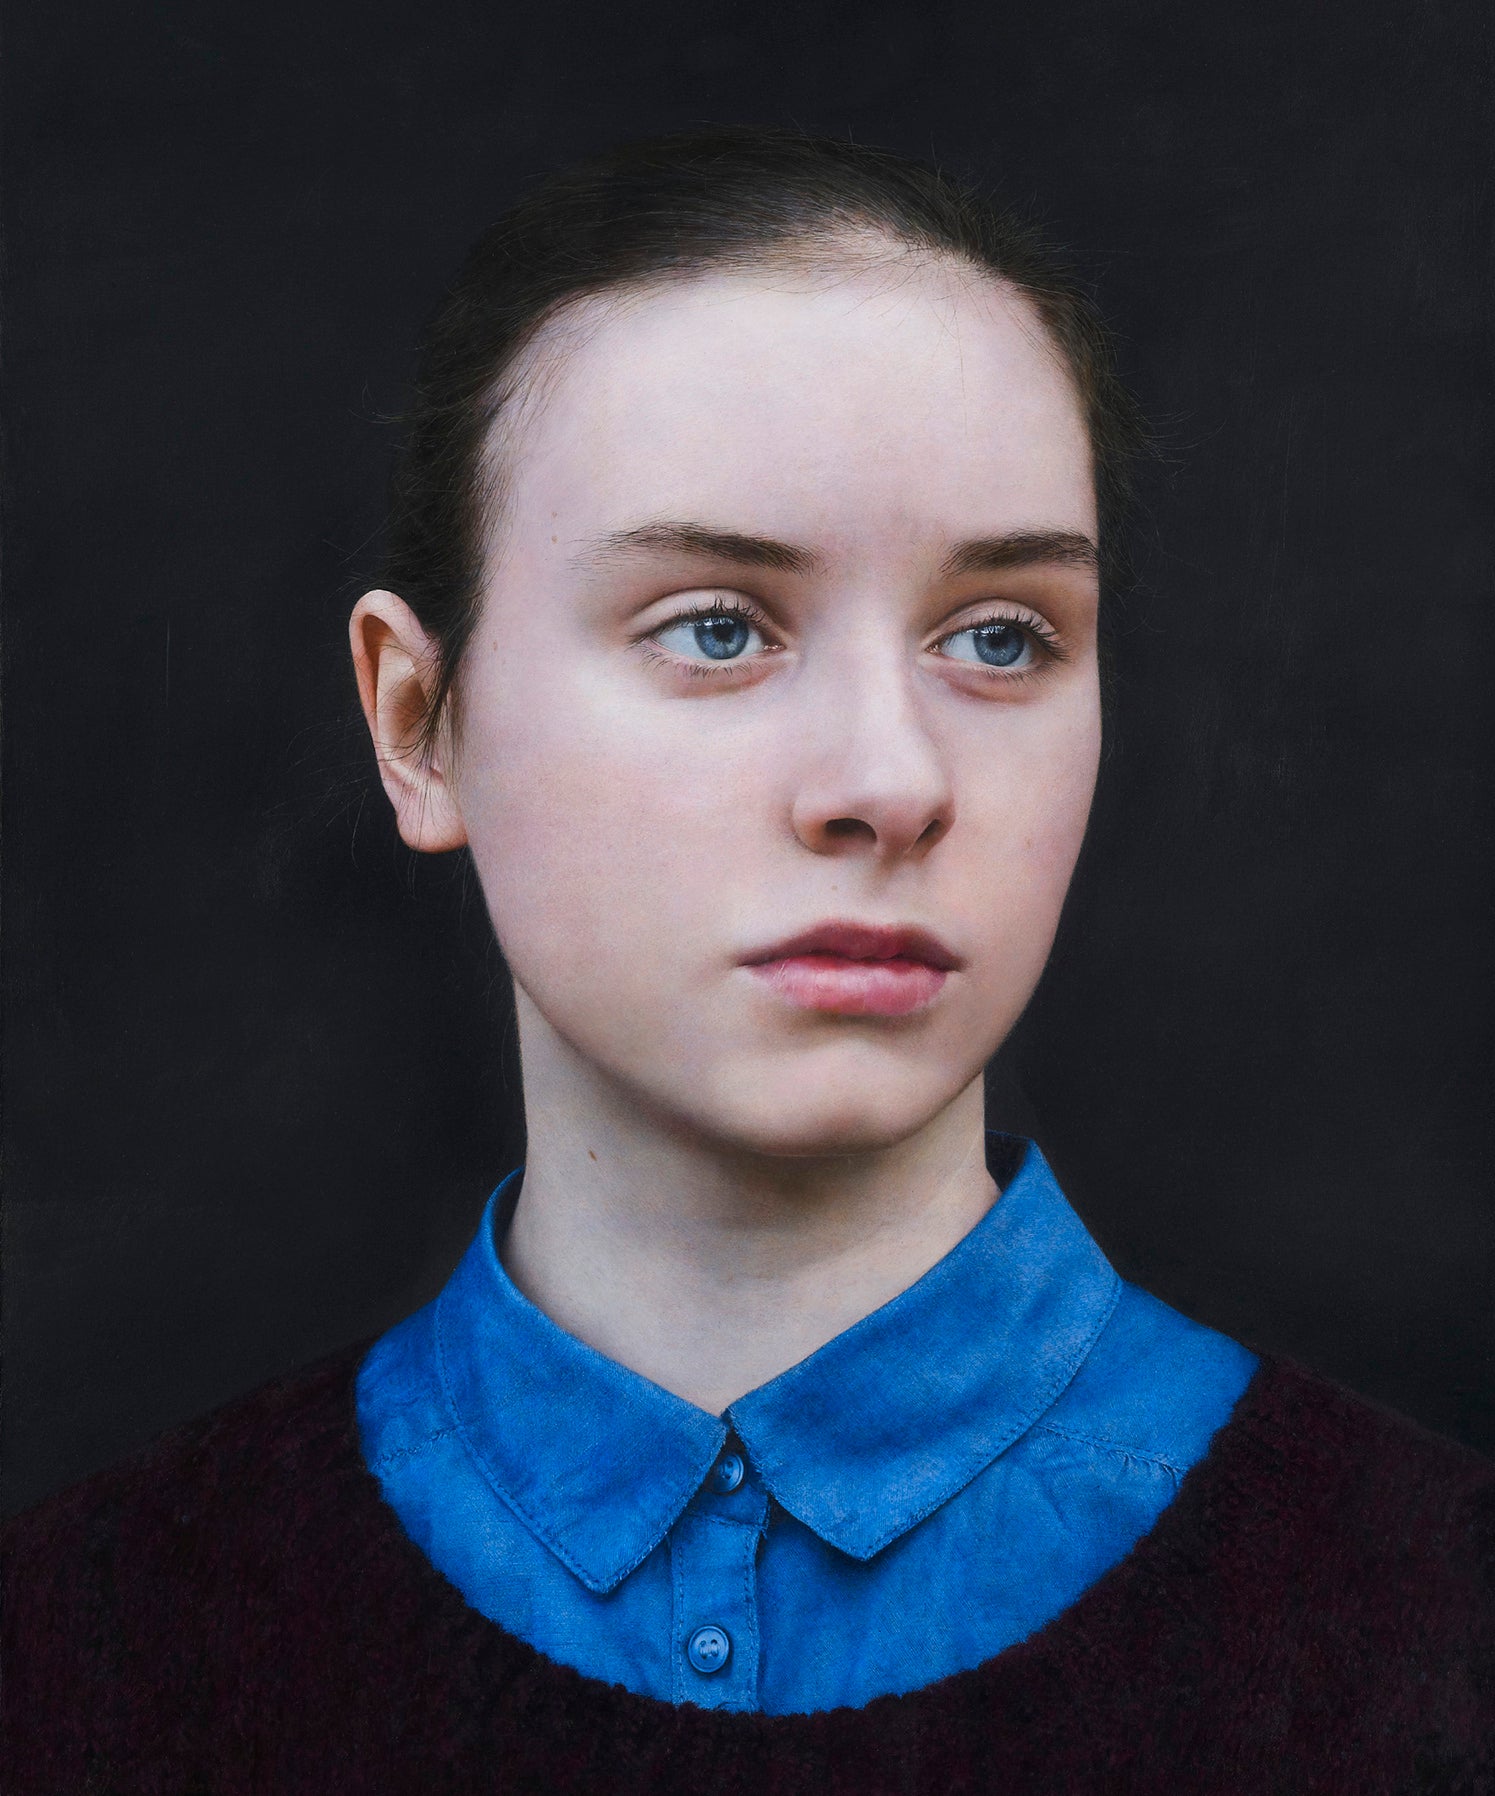 'Eliza' by Michael Gaskell, one of three works in the running for the BP Portrait Award